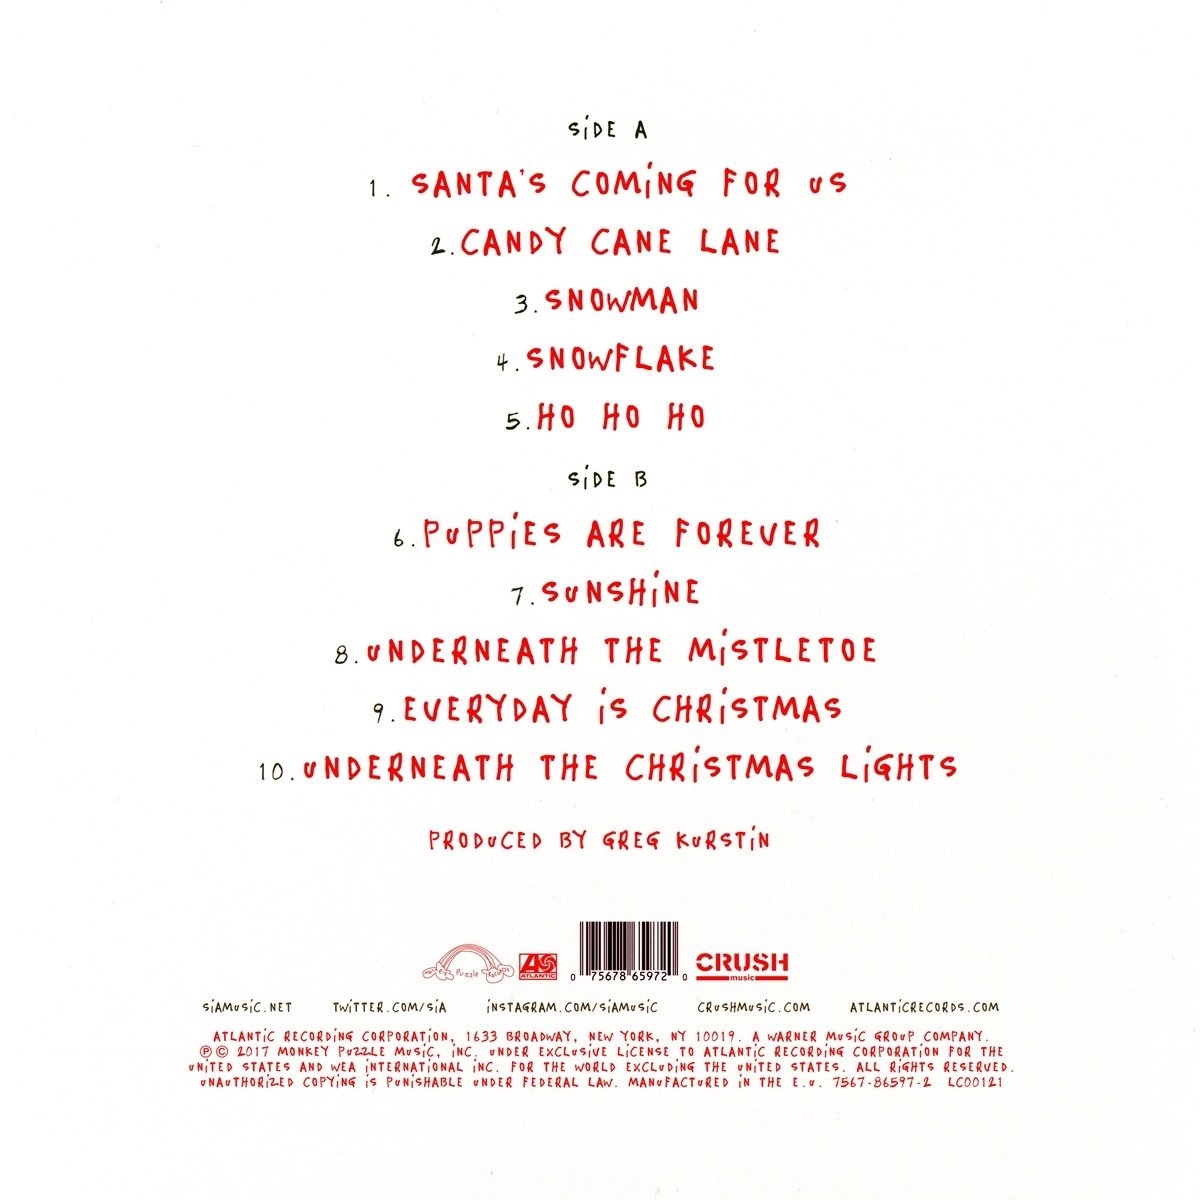 Everyday is Christmas back cover